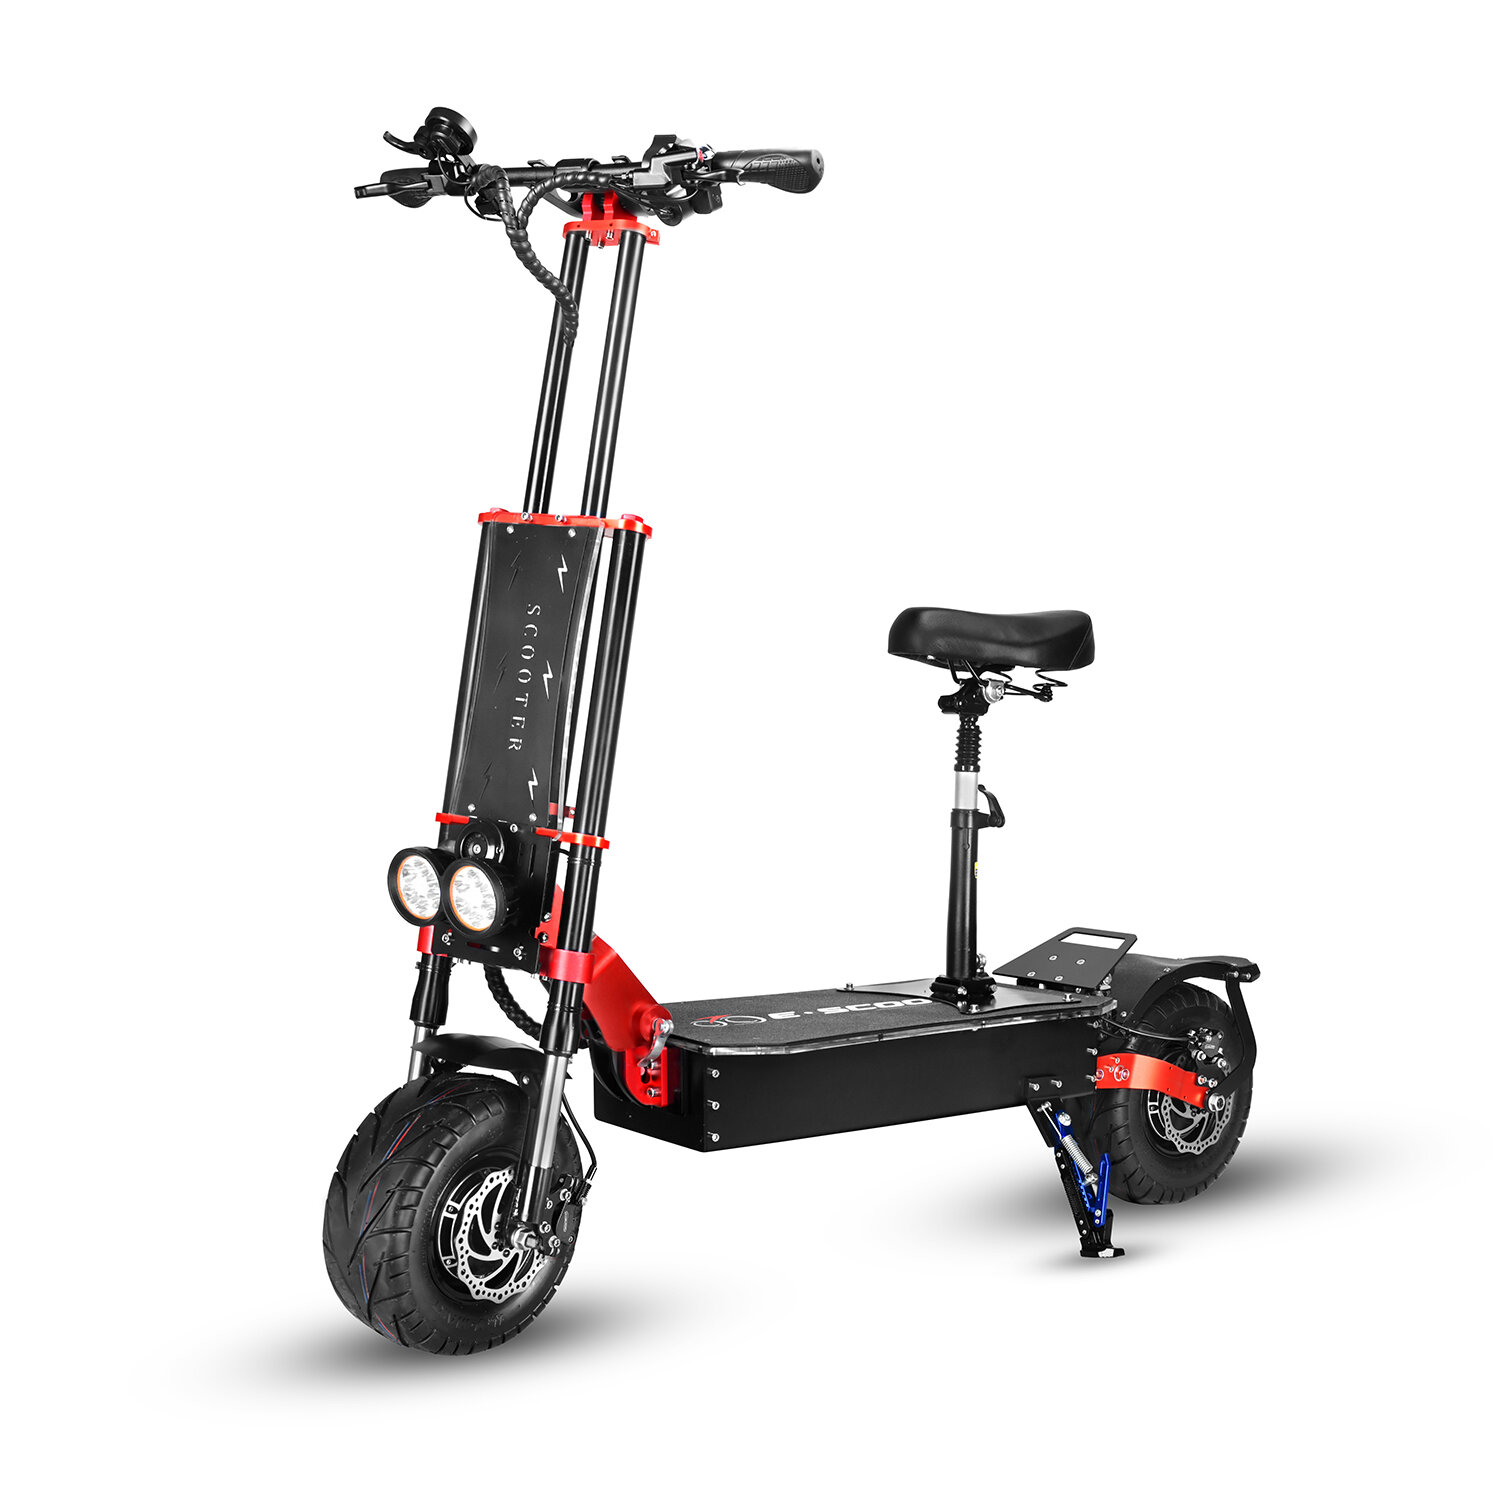 best price,boyueda,s4,43ah,6000w,60v,oil,brake,inch,electric,scooter,discount